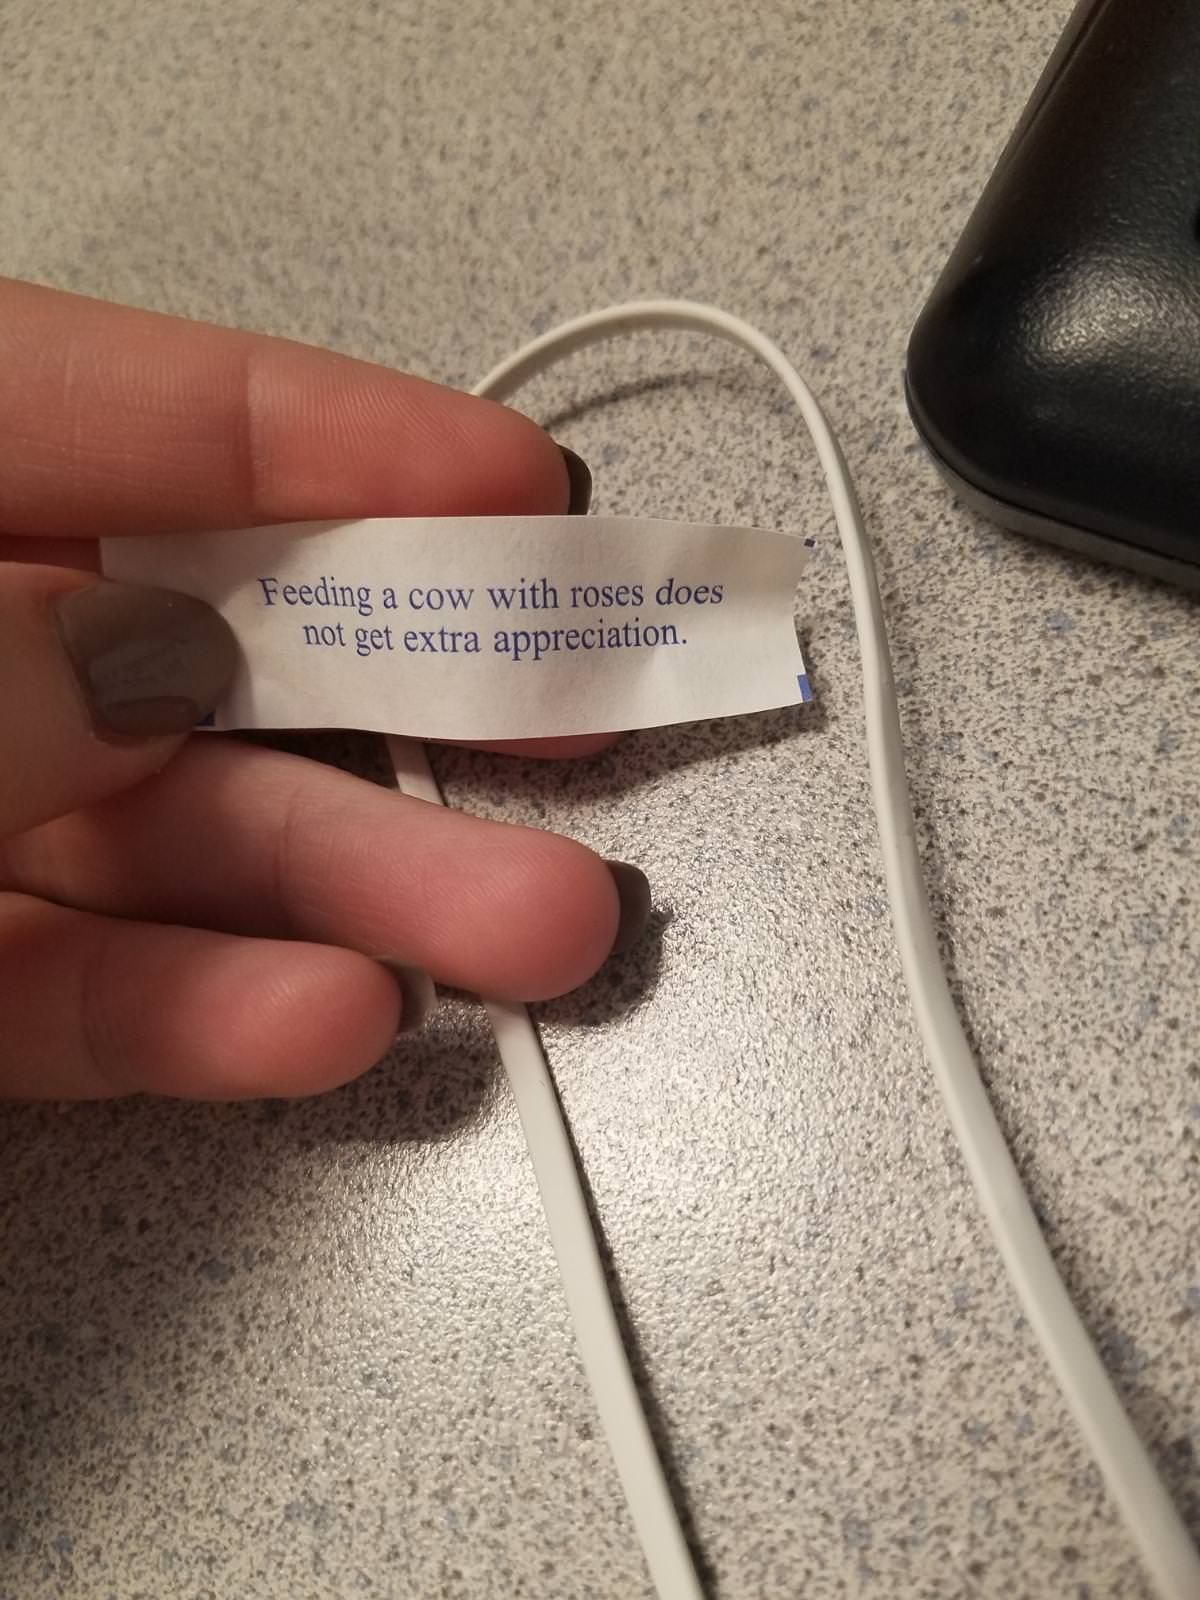 I tossed a fortune cookie in my wife's lunch today. She angrily sent me this picture. Like I control the fortunes inside the cookies and I picked this one on purpose.